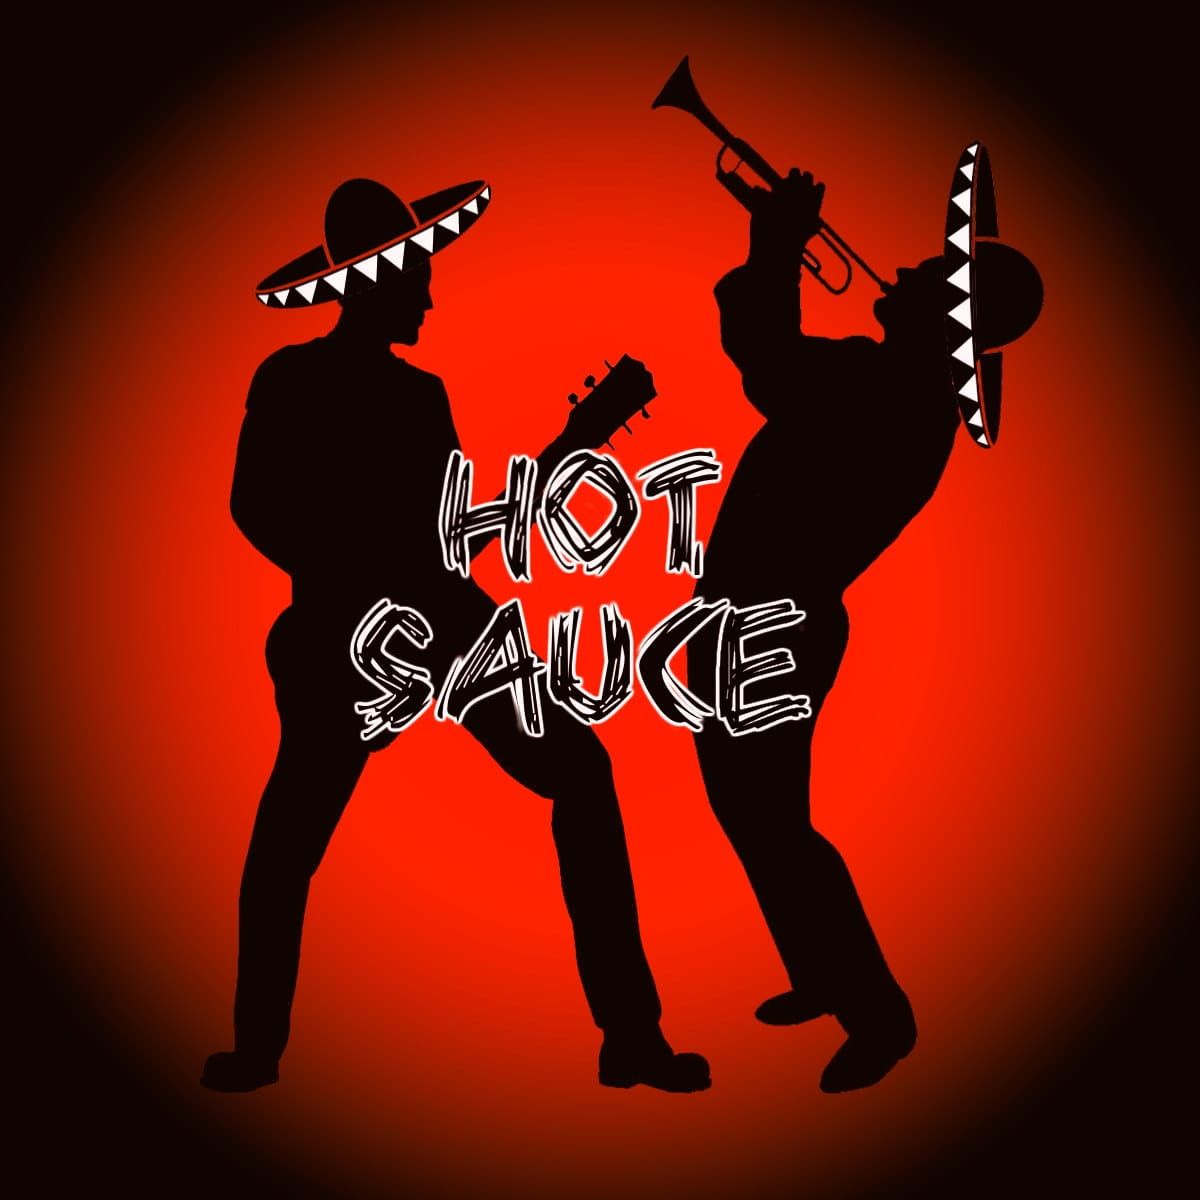 Hot Sauce Band returns to double the sauce